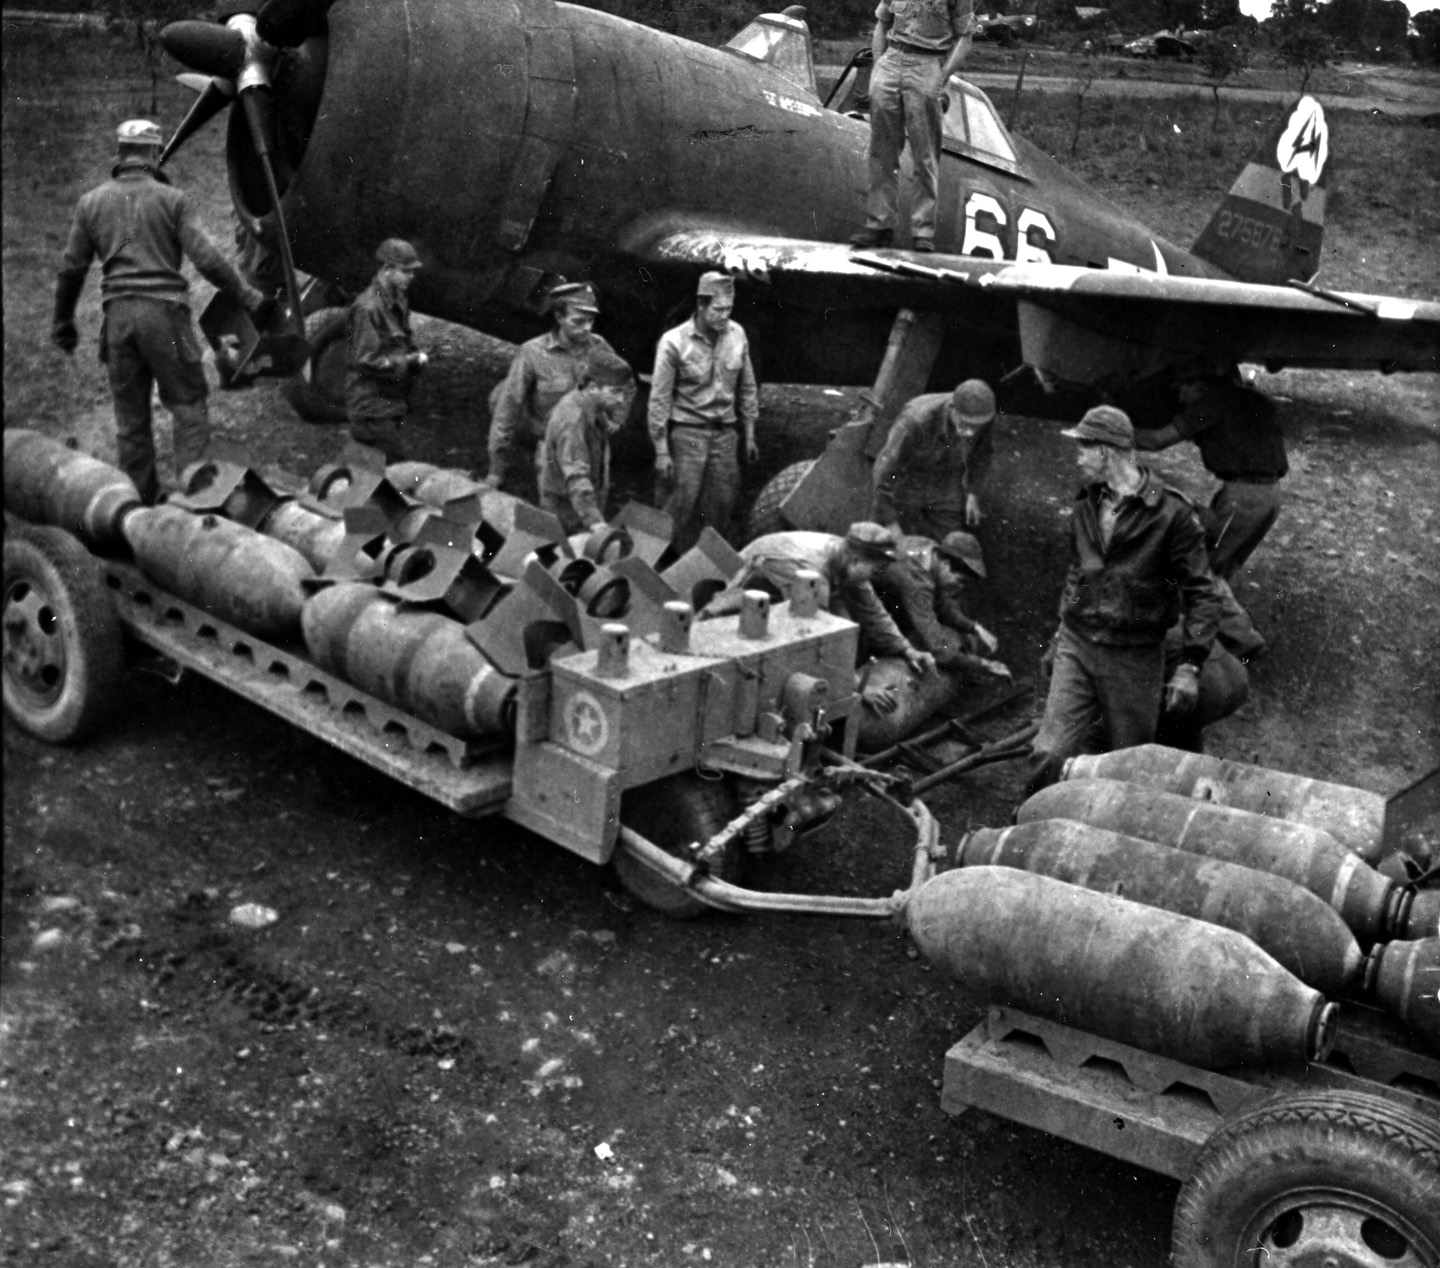 One of heaviest fighter aircraft of World War II, the Republic P-47 Thunderbolt, photographed at an airstrip in Italy, was a hefty radial-engine plane that could take severe punishment and bring its pilot safely home. The Thunderbolt was versatile, serving as an escort, dogfighter, and fighter bomber during the war. In this image ground crewmen prepare to attach bombs to hardpoints under a P-47D’s wings.